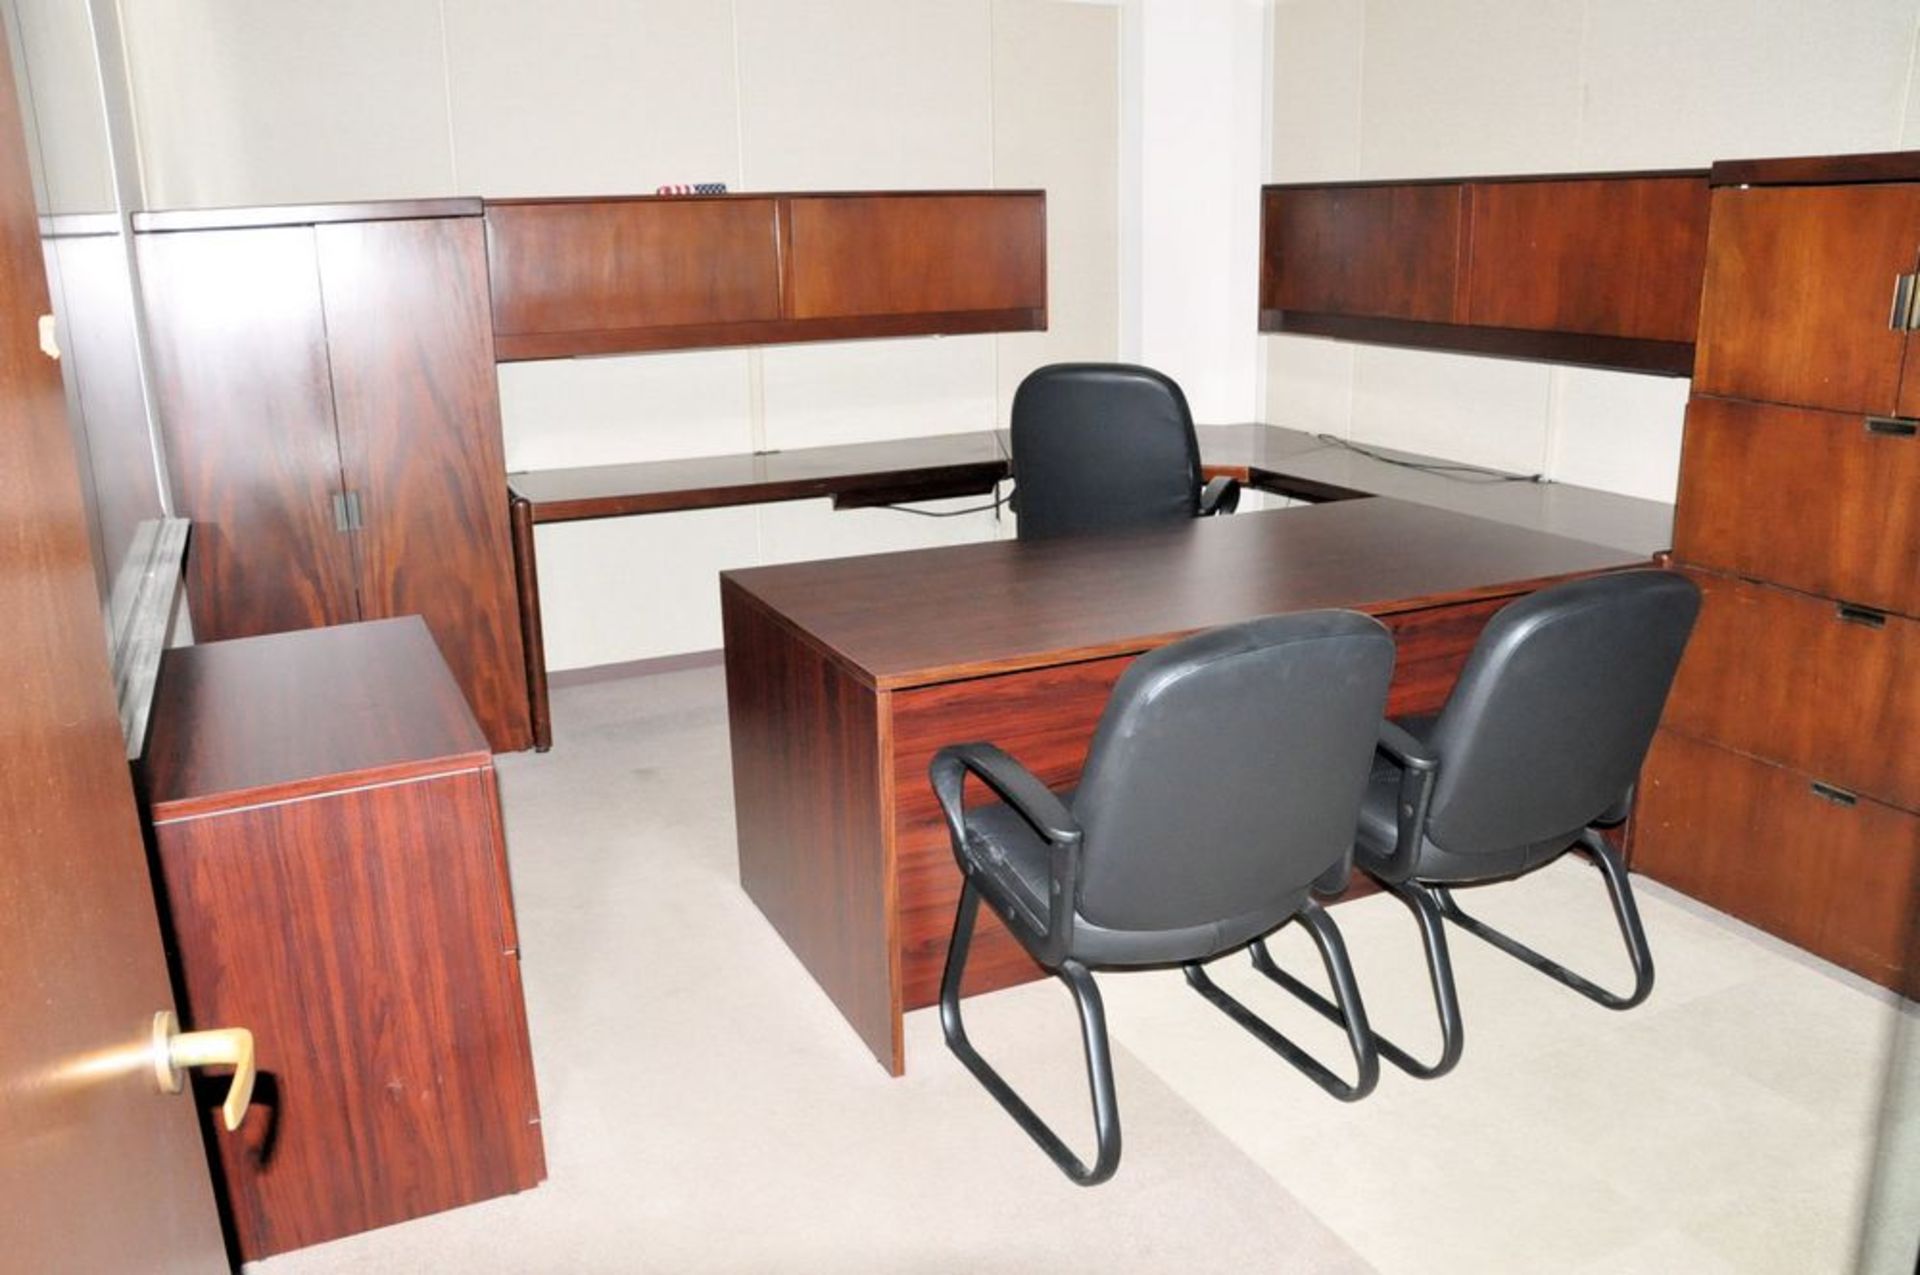 Lot-(1) Modular Desk System with (2) Overhead Cabinets, (1) 2-Door Storage Cabinet, (2) Lateral File